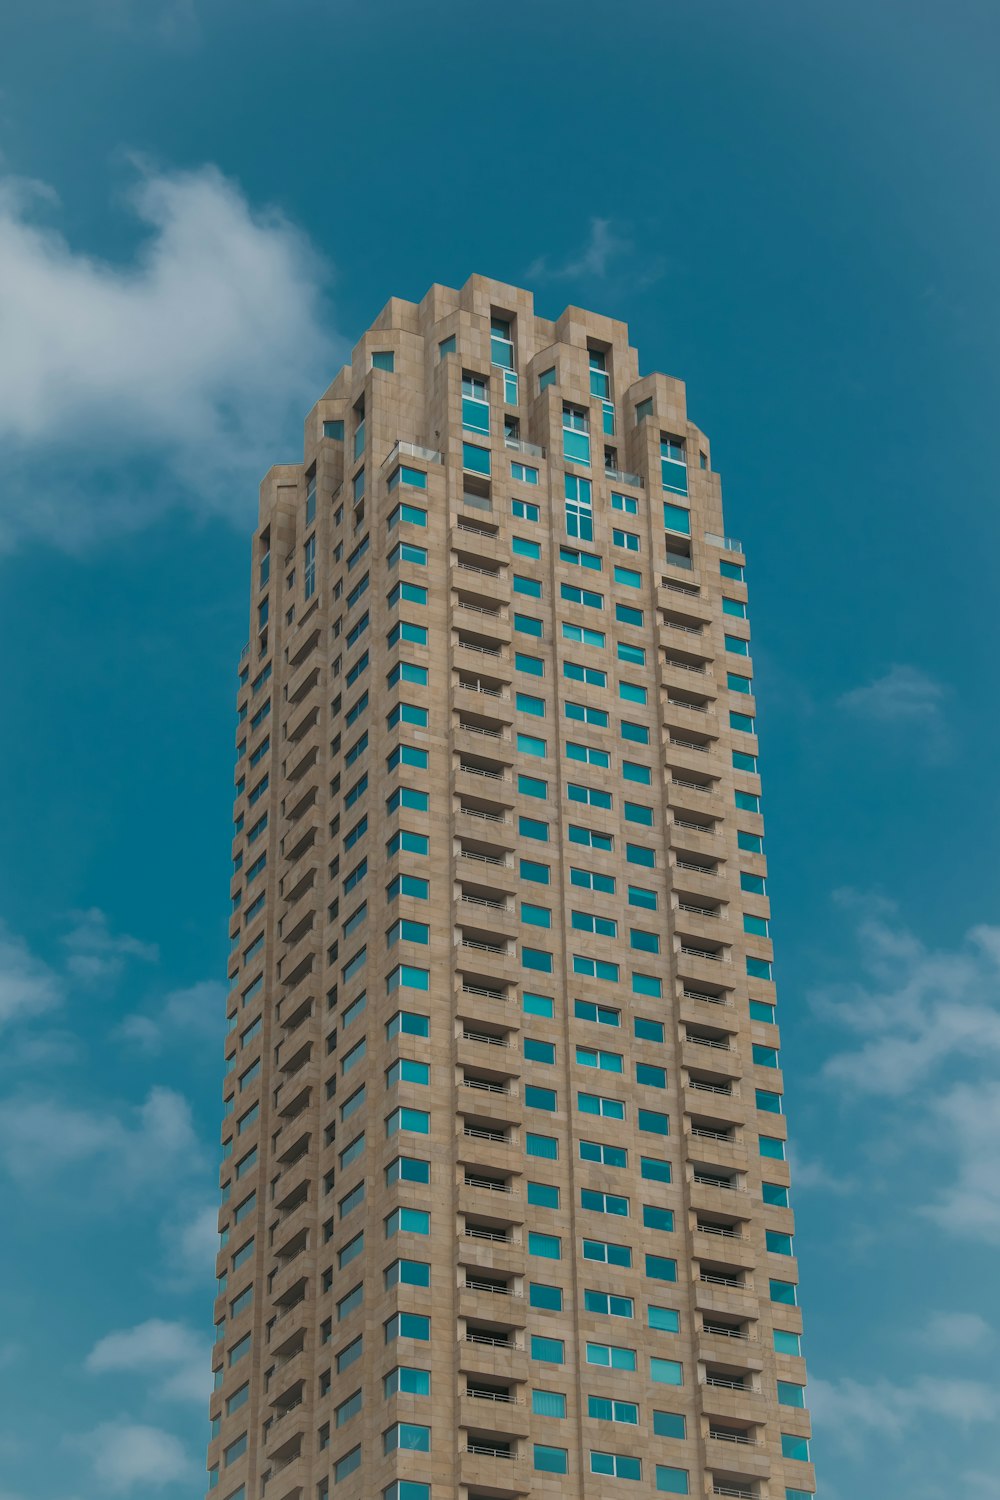 a tall building with many windows on the top of it